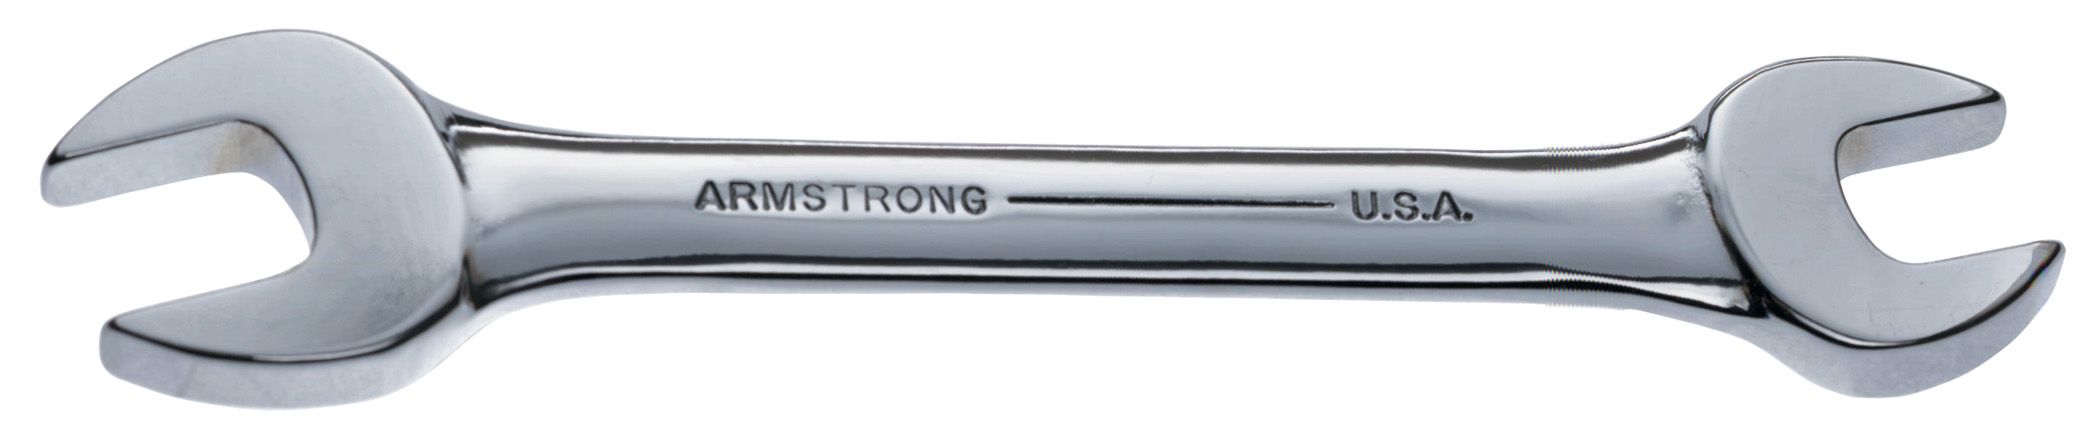 Armstrong 3/4 x 7/8 Full Polish Open End Wrench